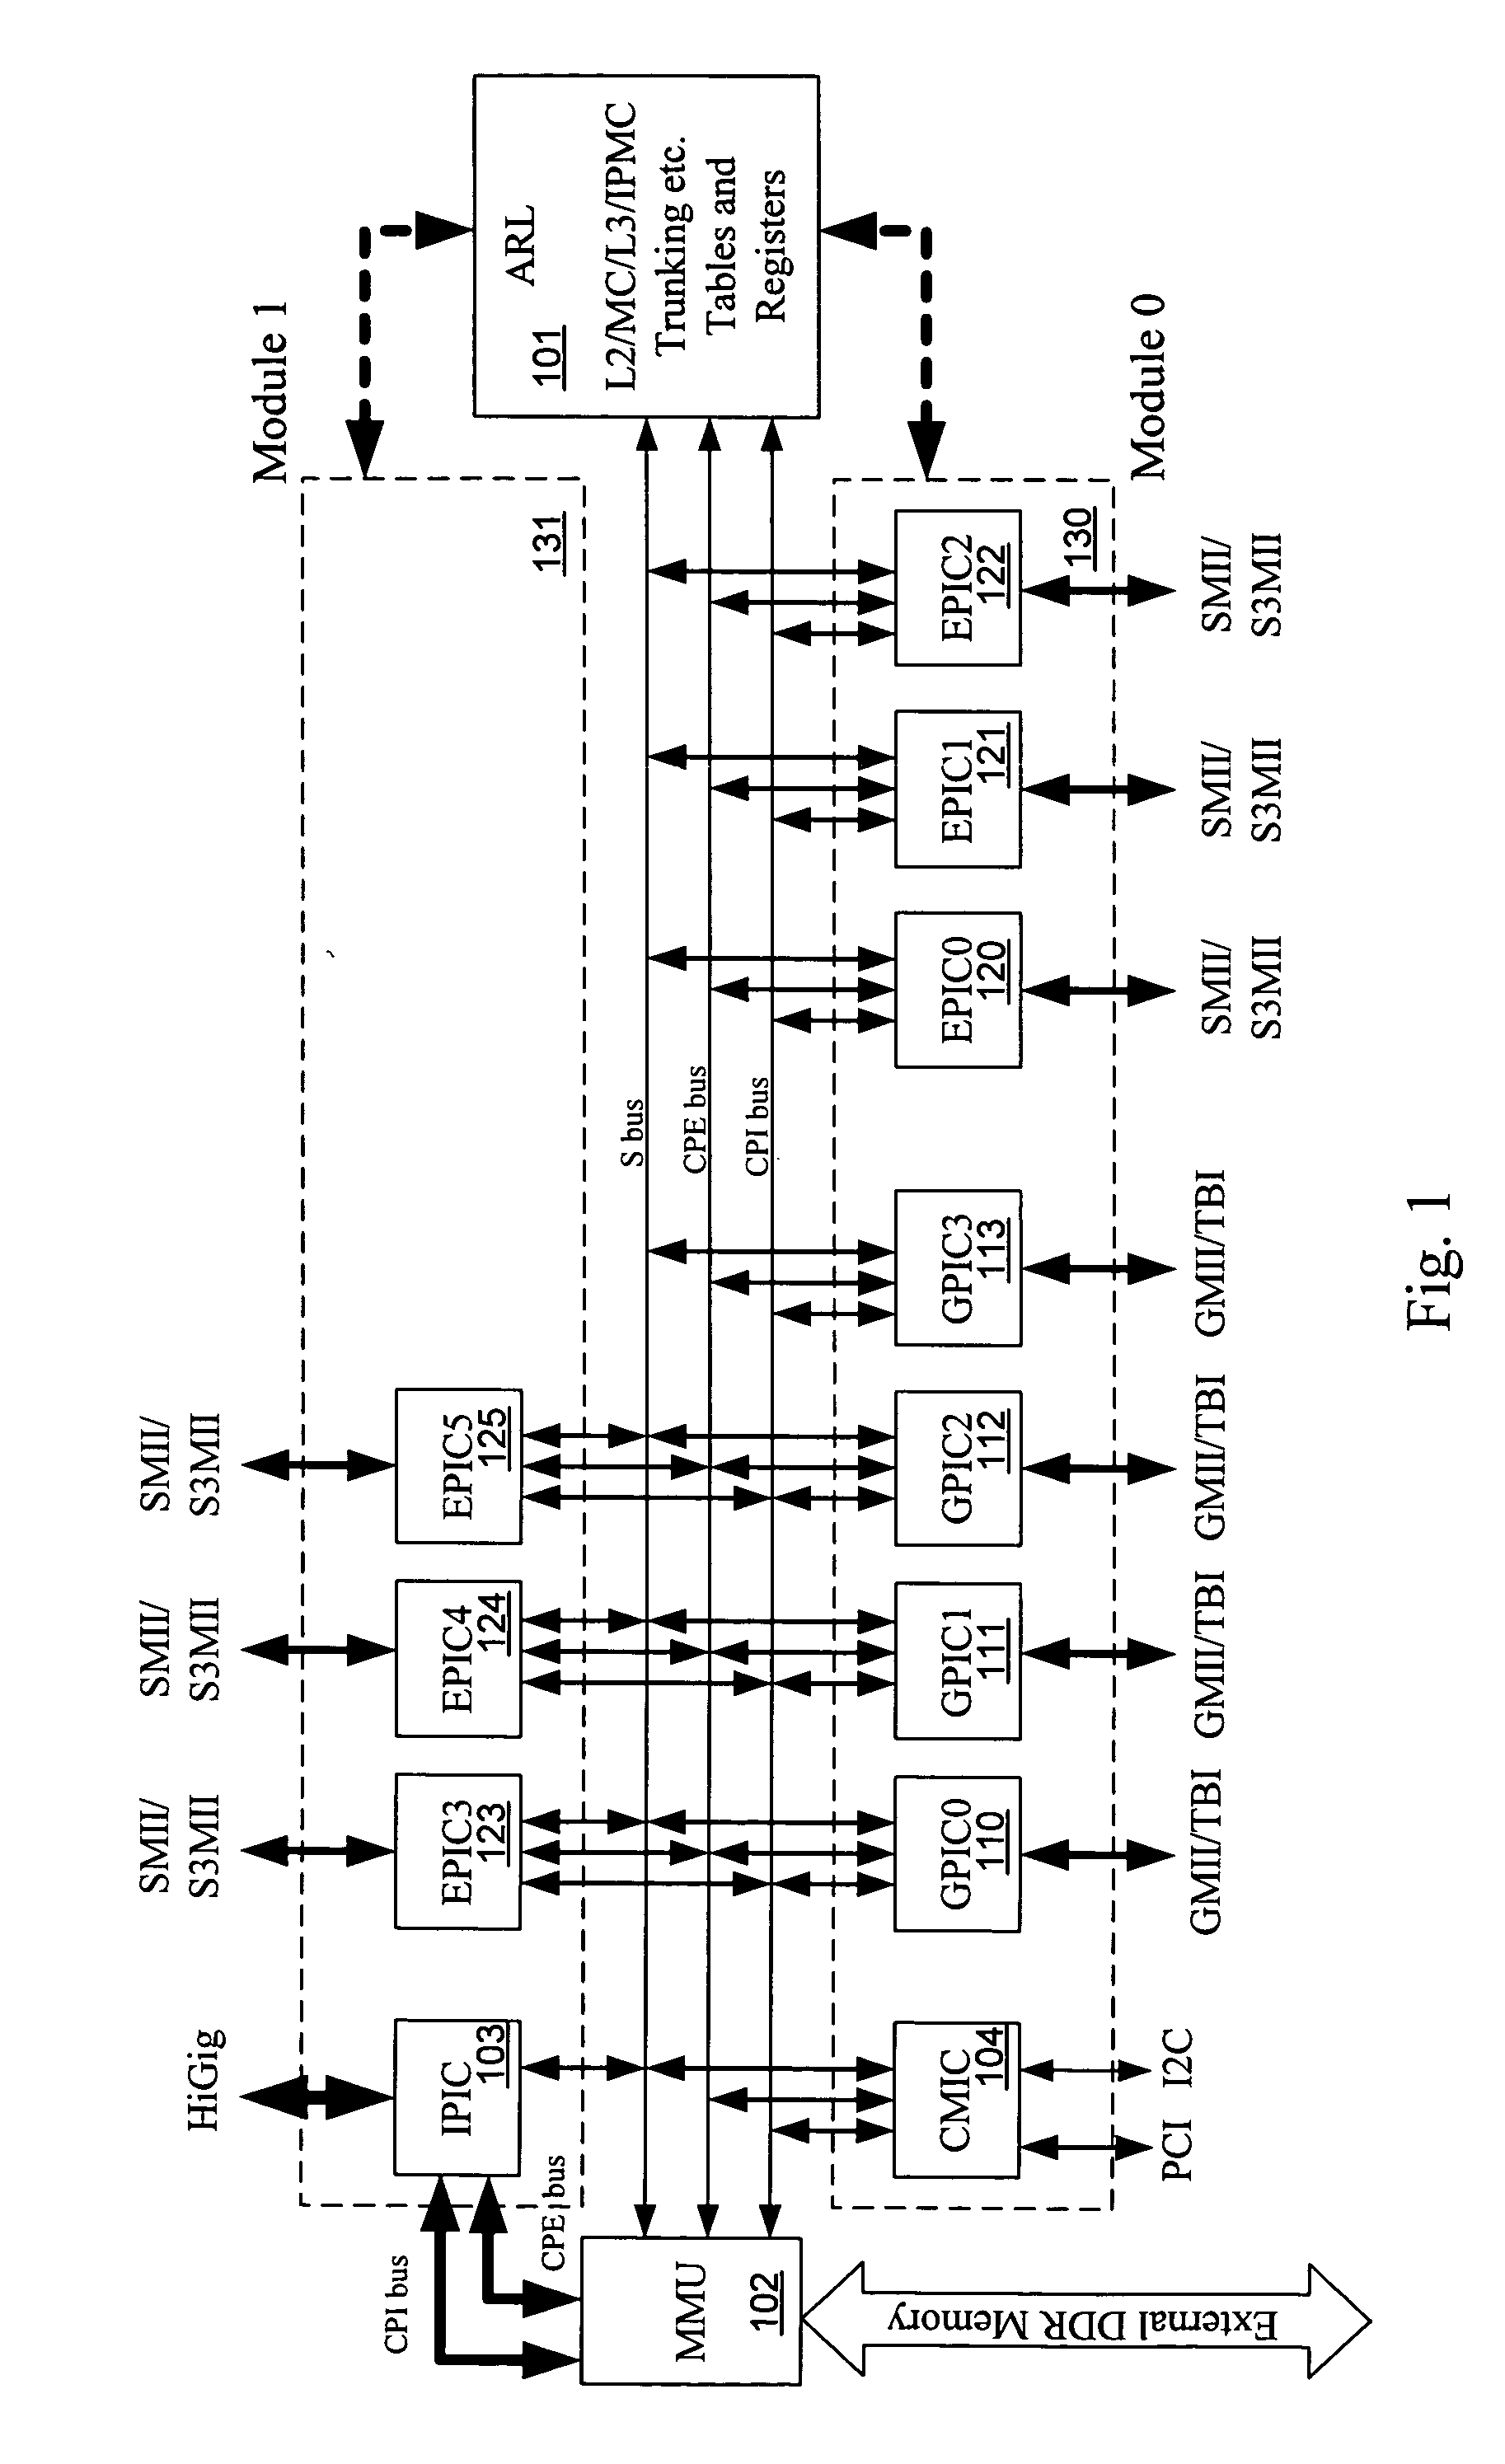 Single and double tagging schemes for packet processing in a network device